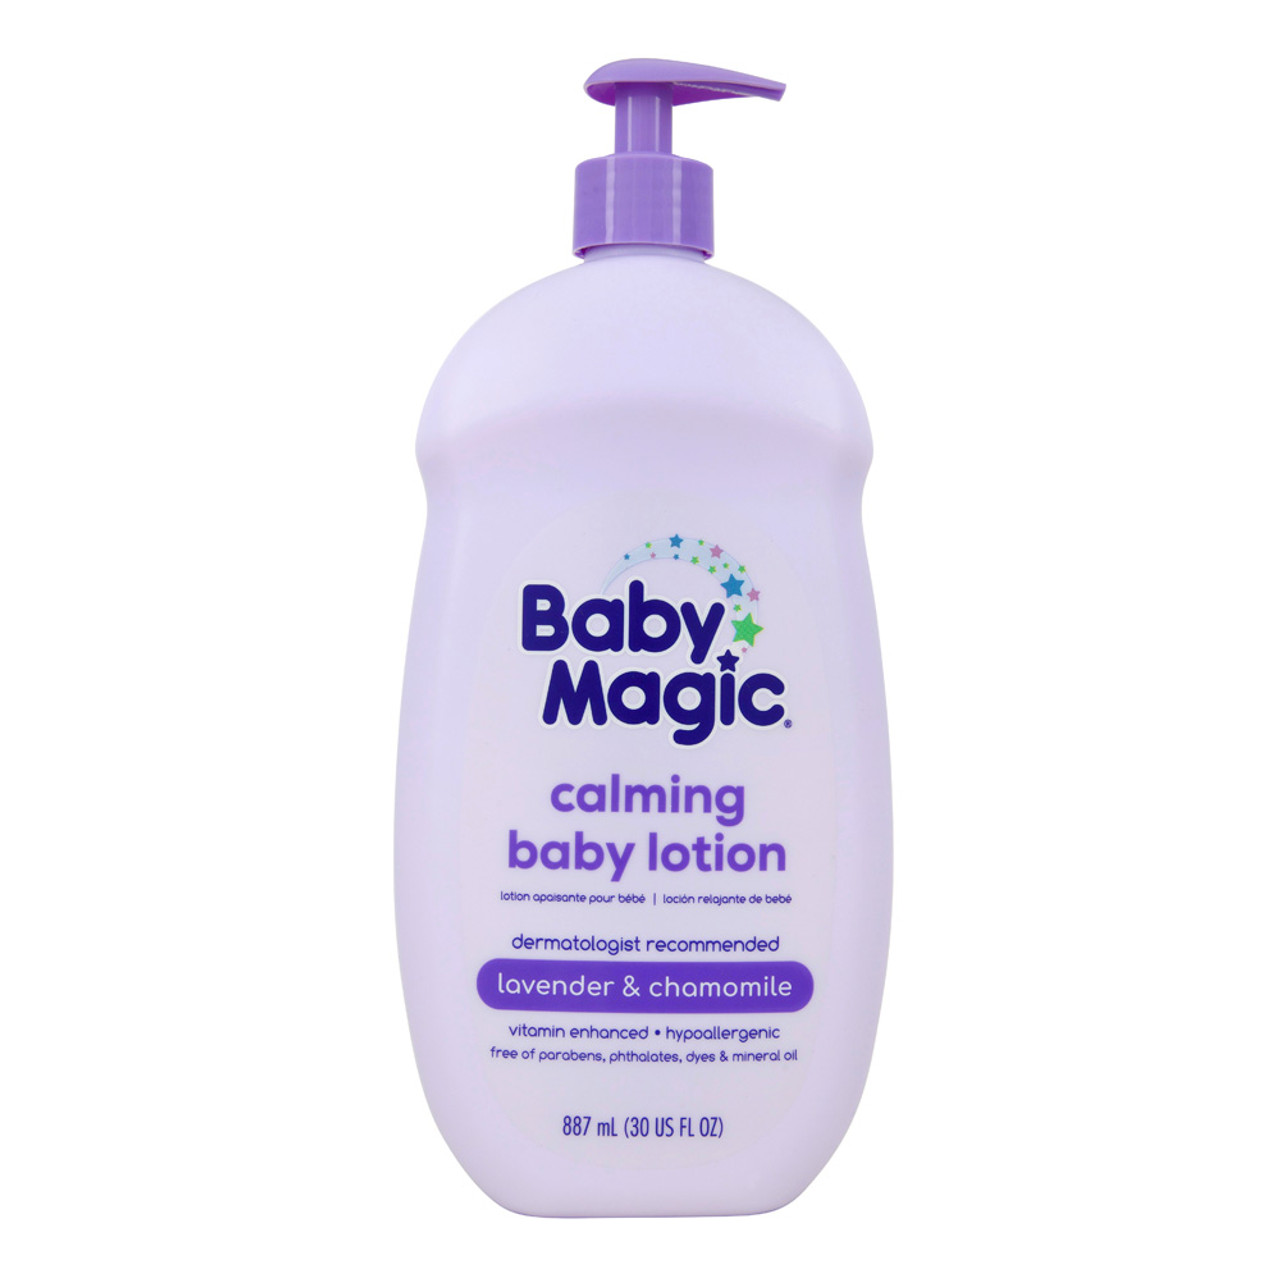 Waxelene Baby Calming Ointment with Organic Lavender, 3 Oz